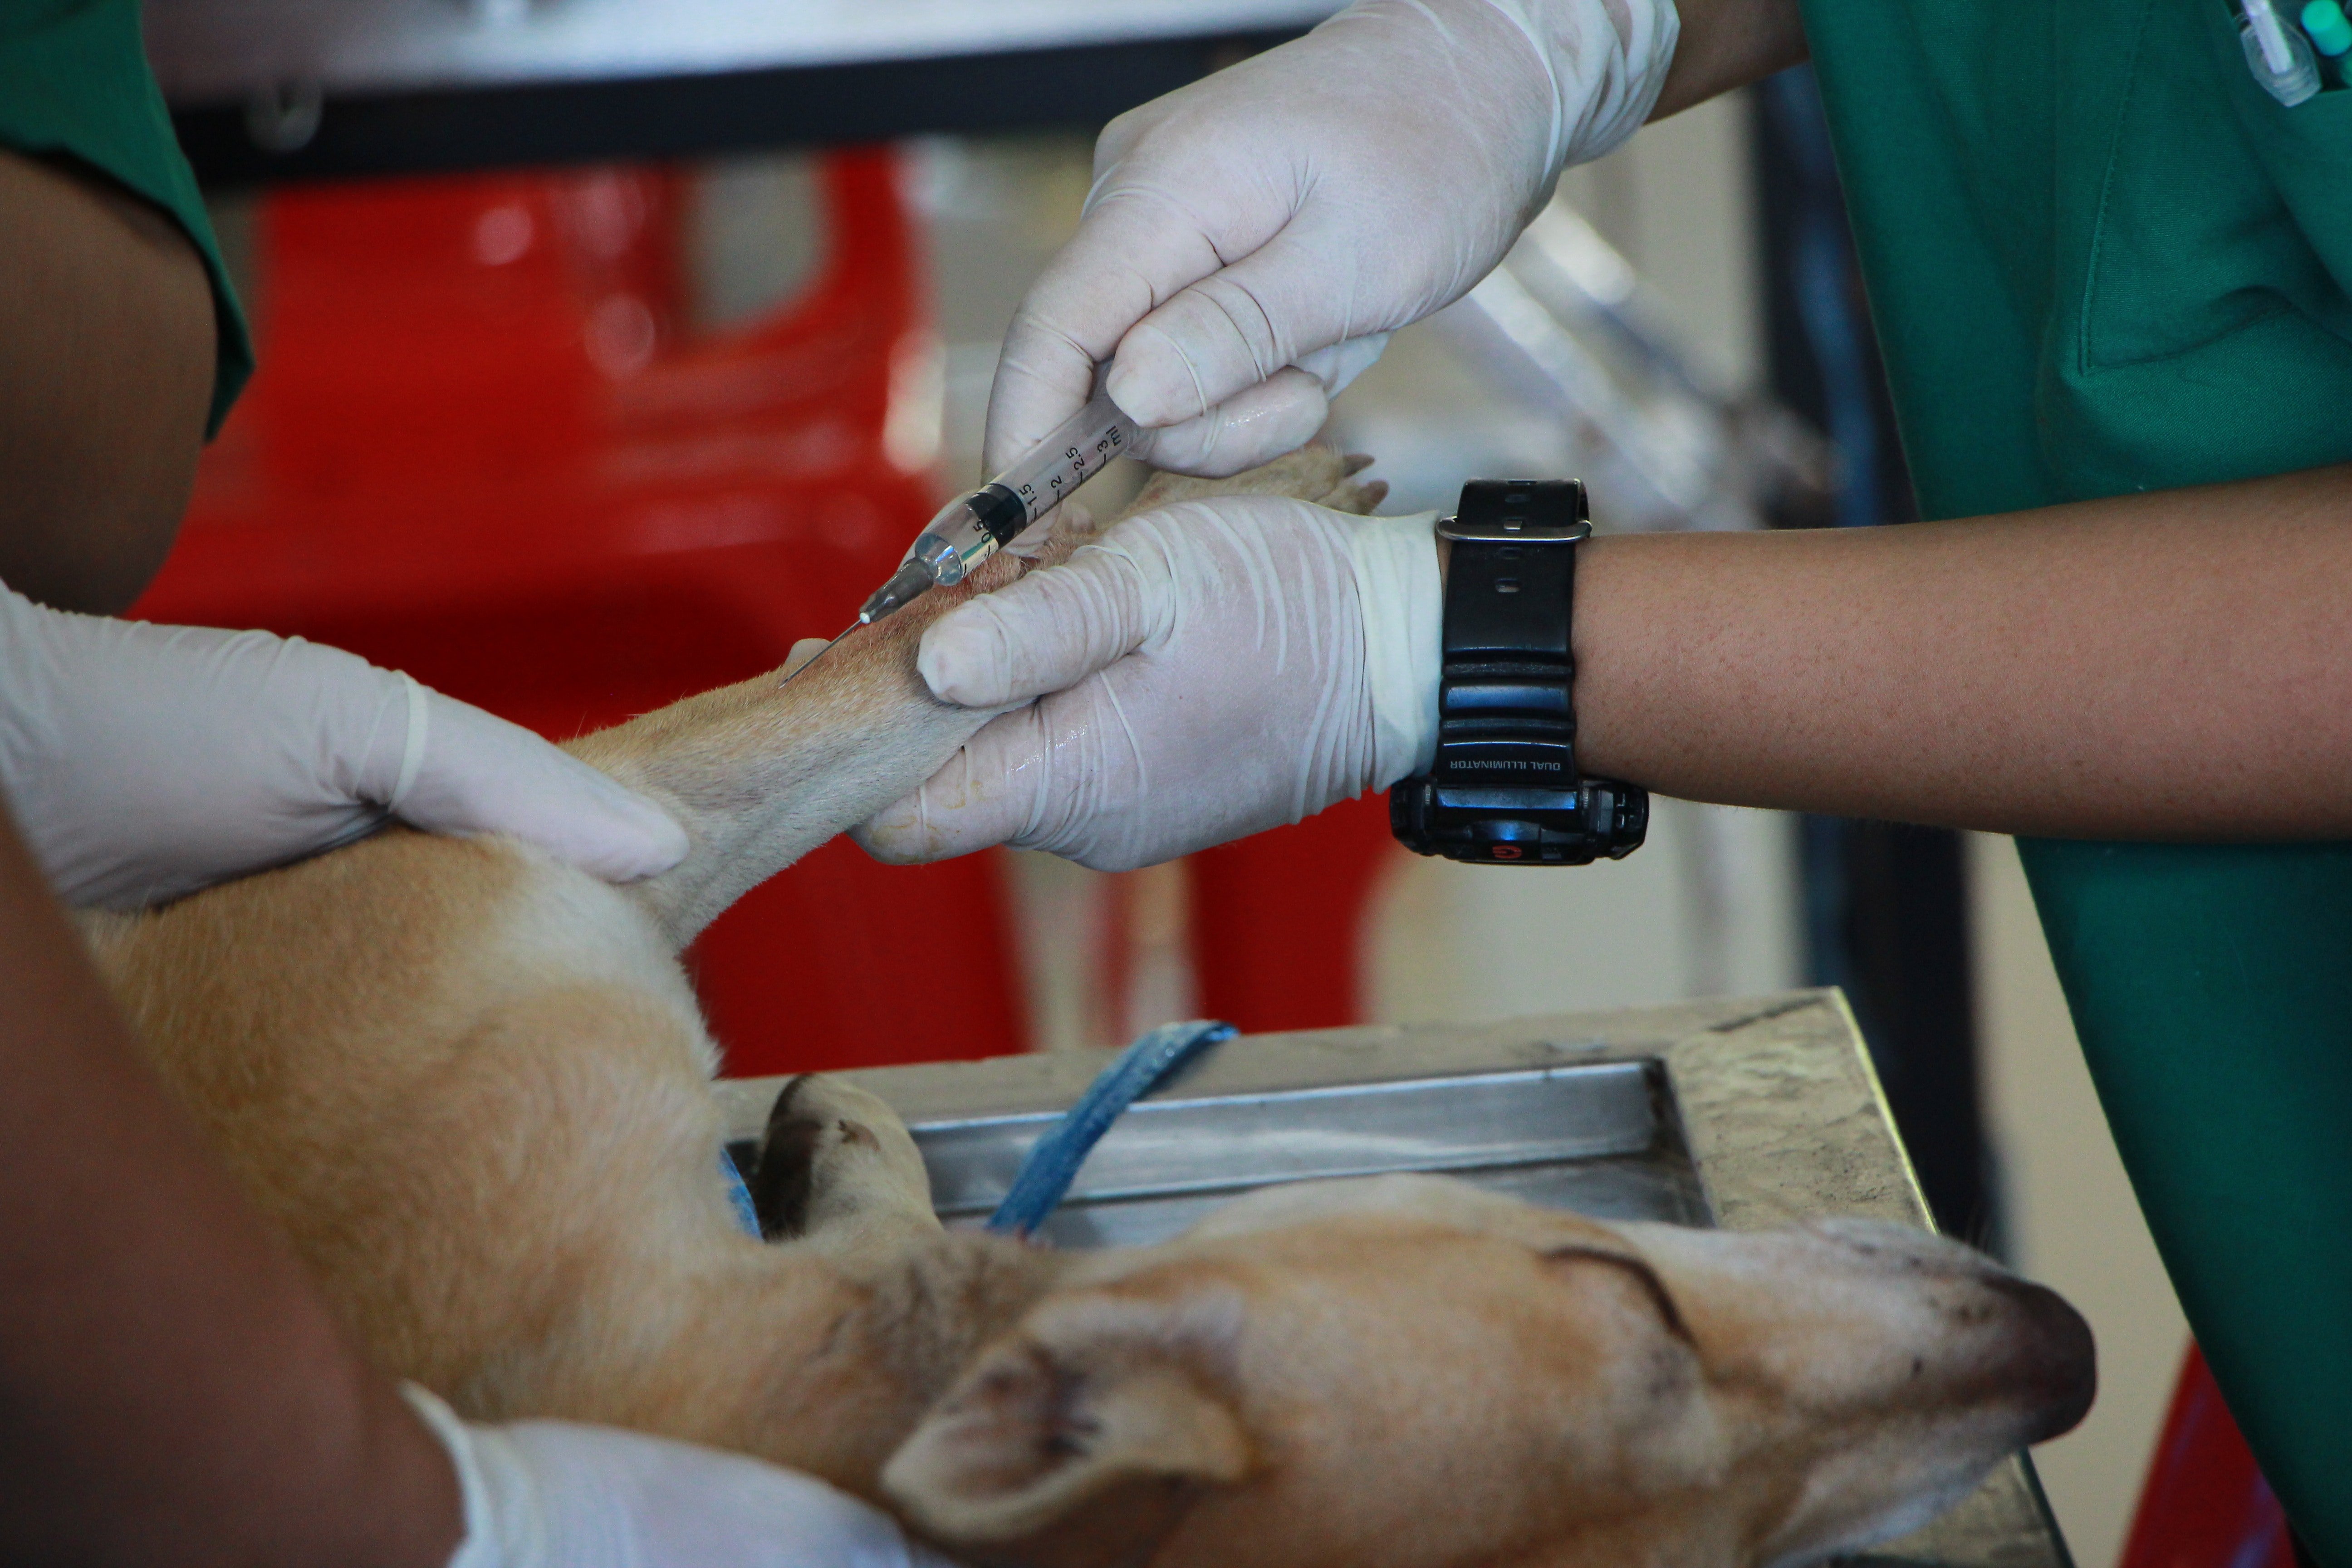 A vet administers some medicine to an injured dog that is lying on the operation table | Photo: Pexels/Pranidchakan Boonrom